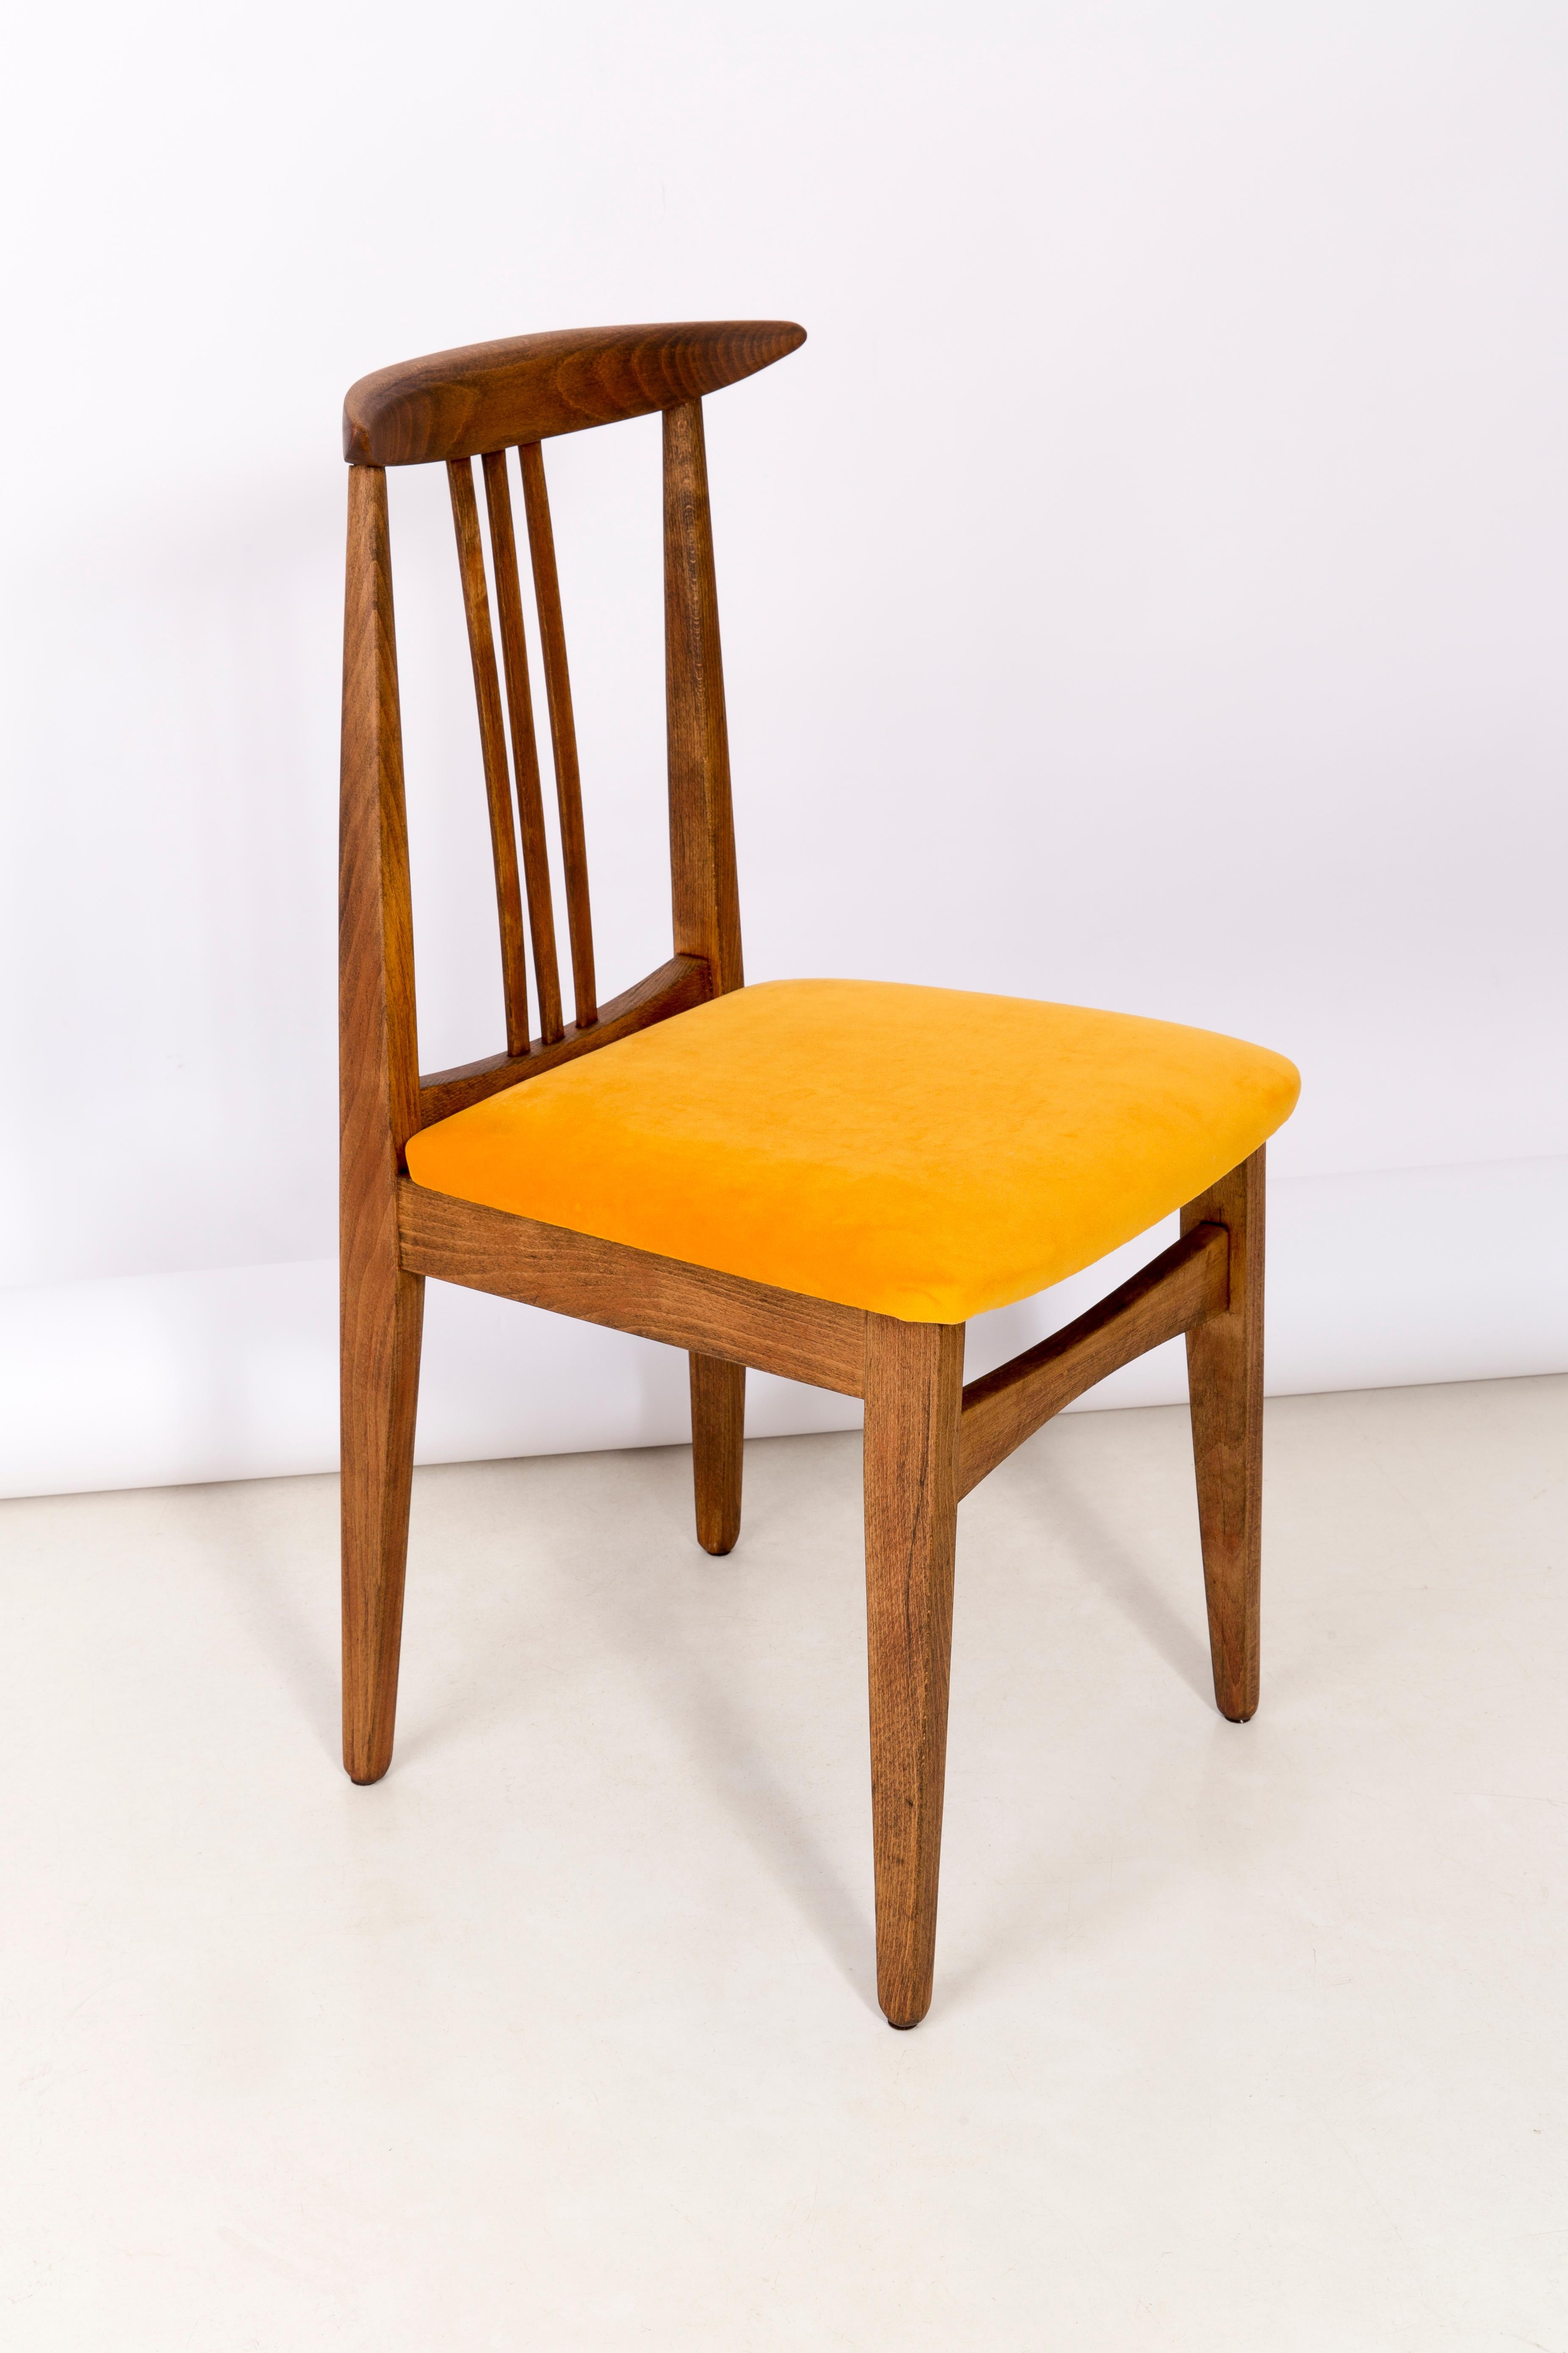 A beautiful beech chair designed by M. Zielinski, type 200 / 100B. Manufactured by the Opole Furniture Industry Center at the end of the 1960s in Poland. The chair is after undergone a complete carpentry and upholstery renovation. Seas covered with